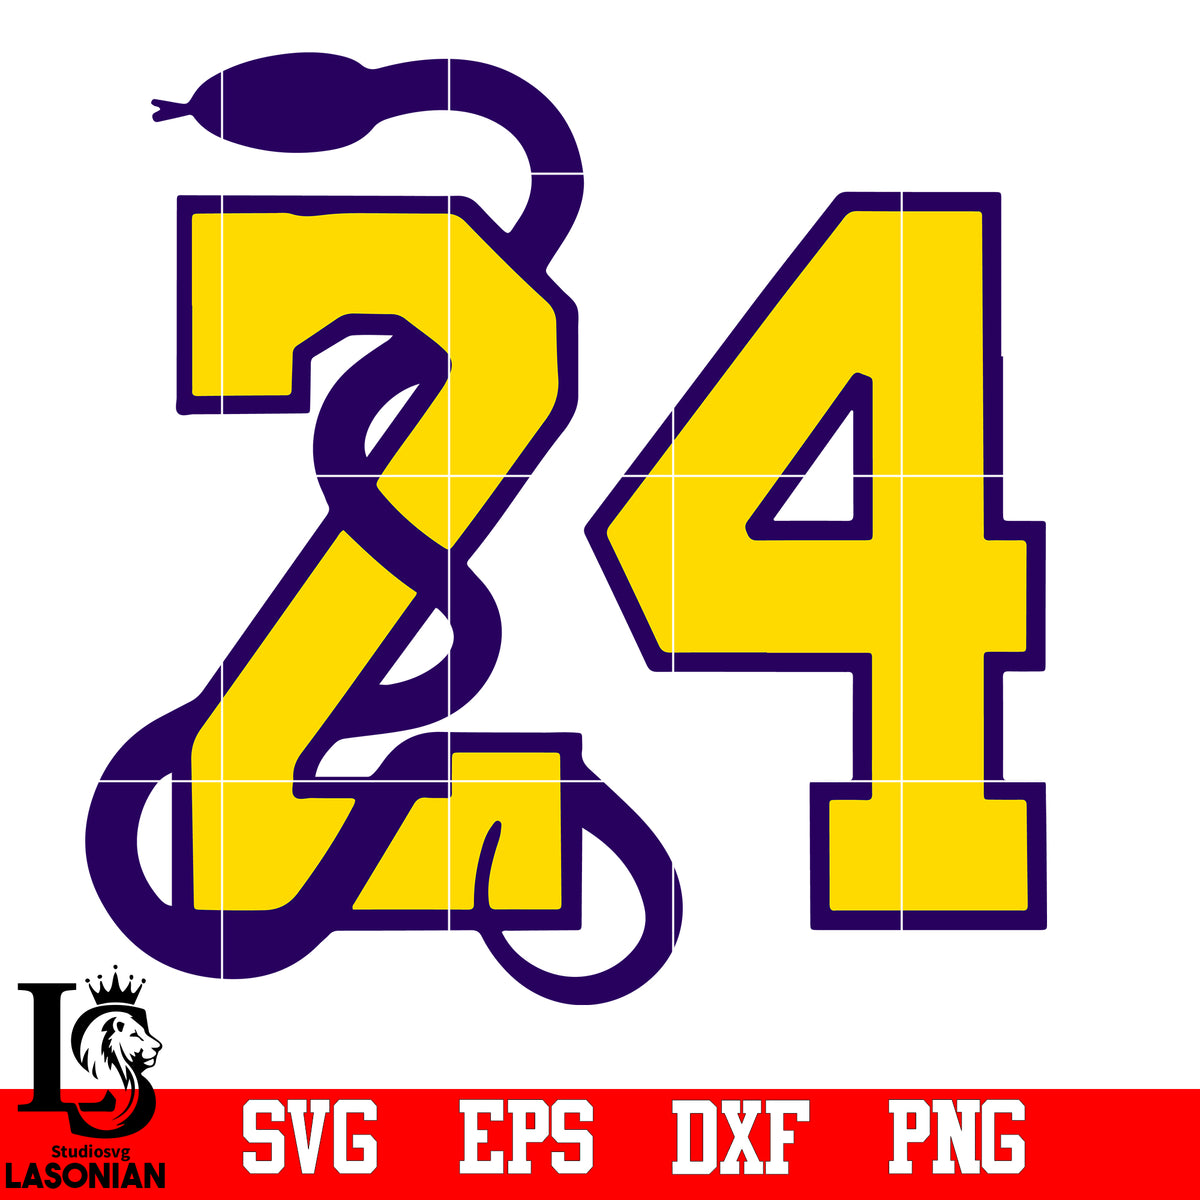 24 lakers png